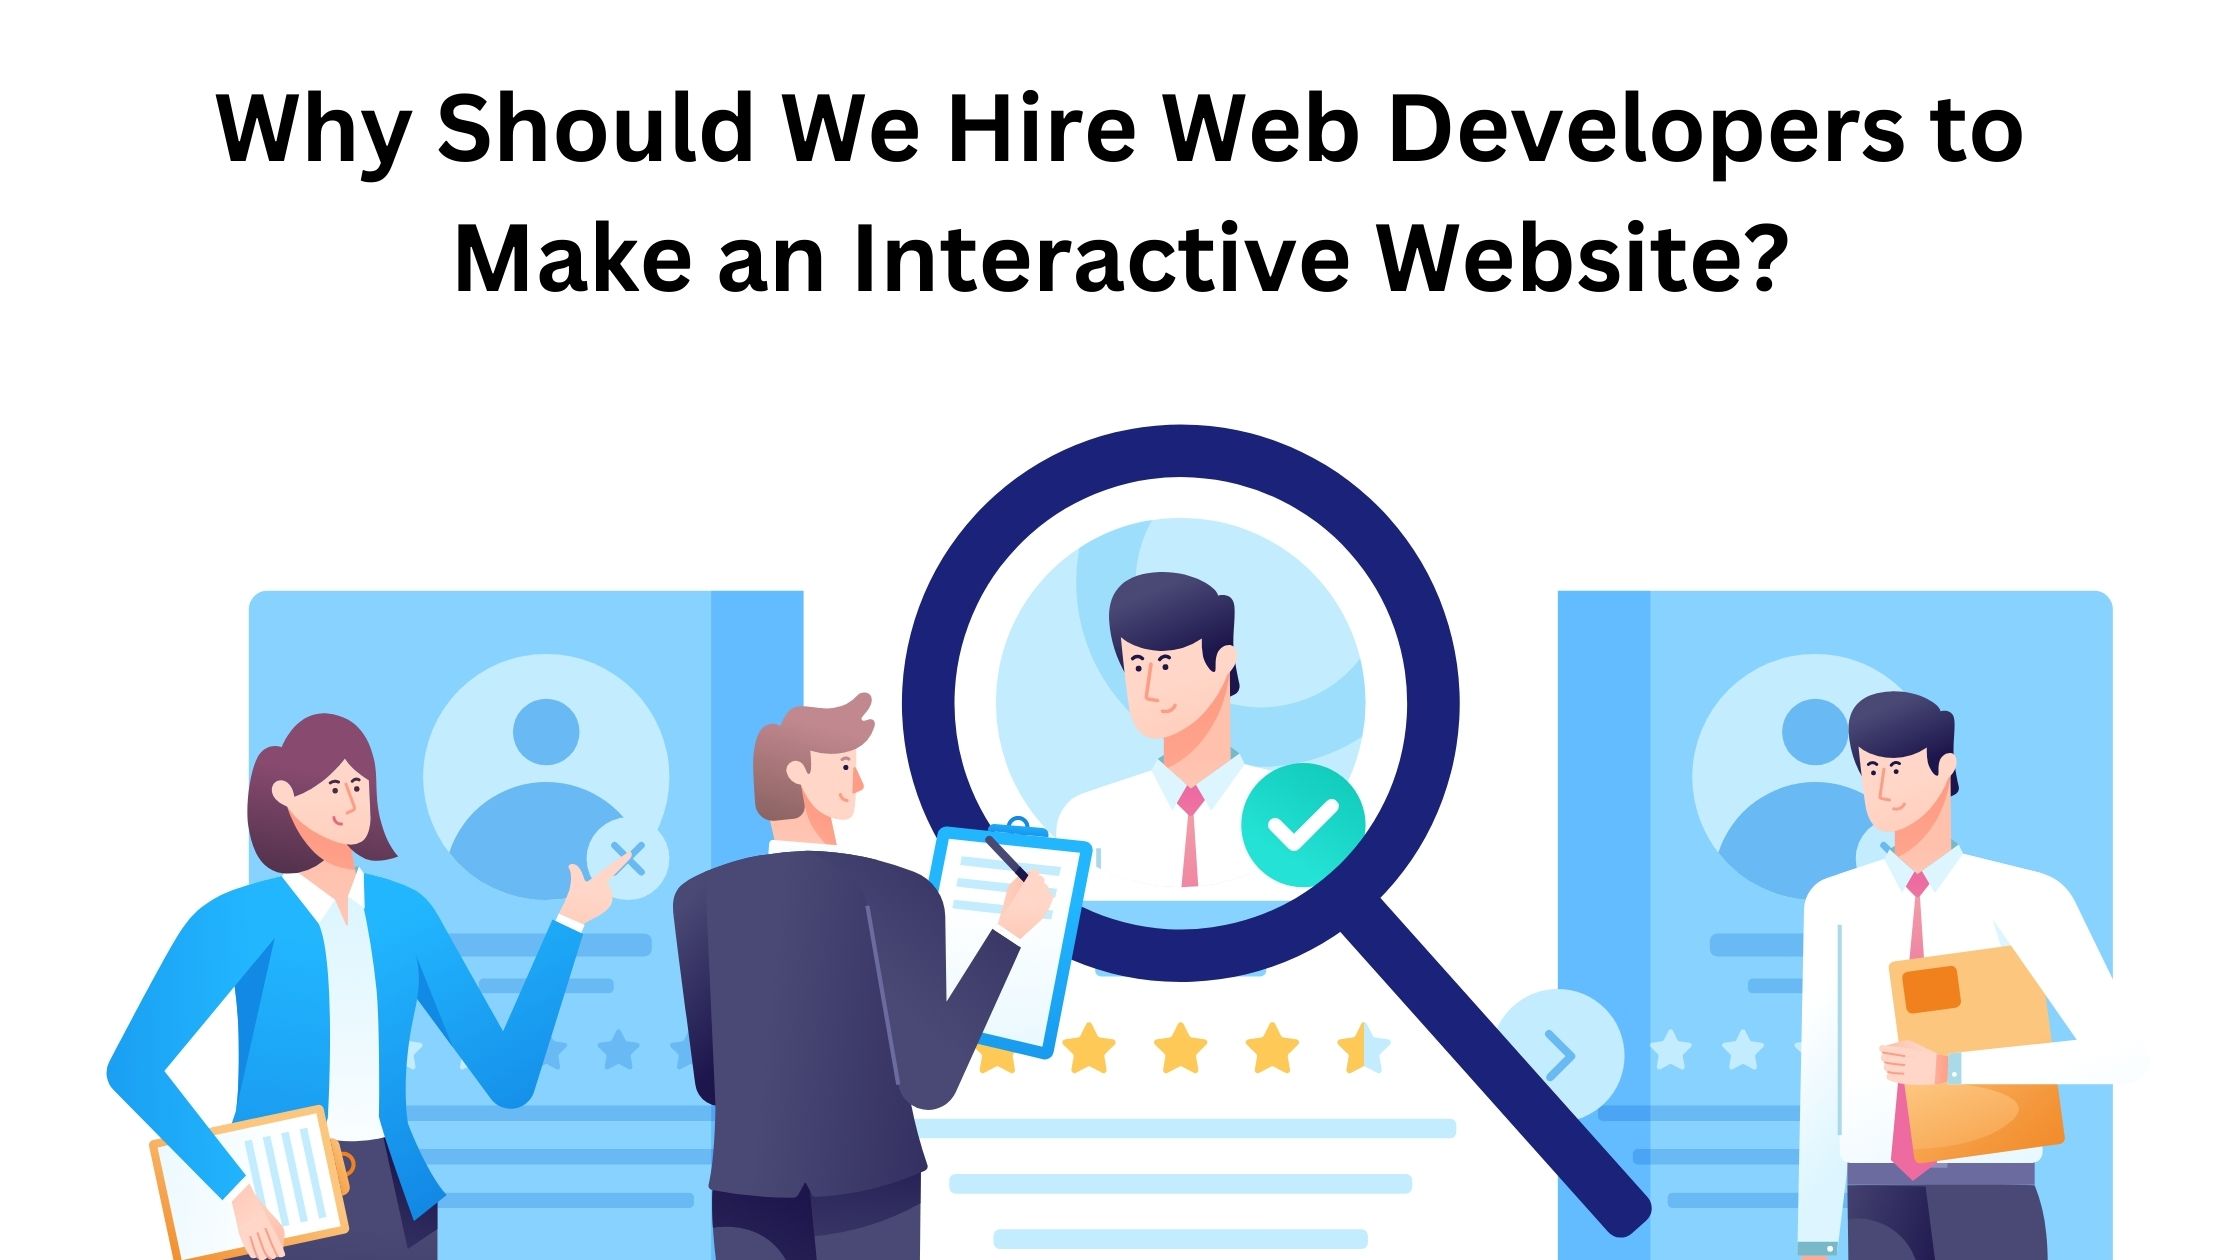 Why Should We Hire Web Developers to Make an Interactive Website